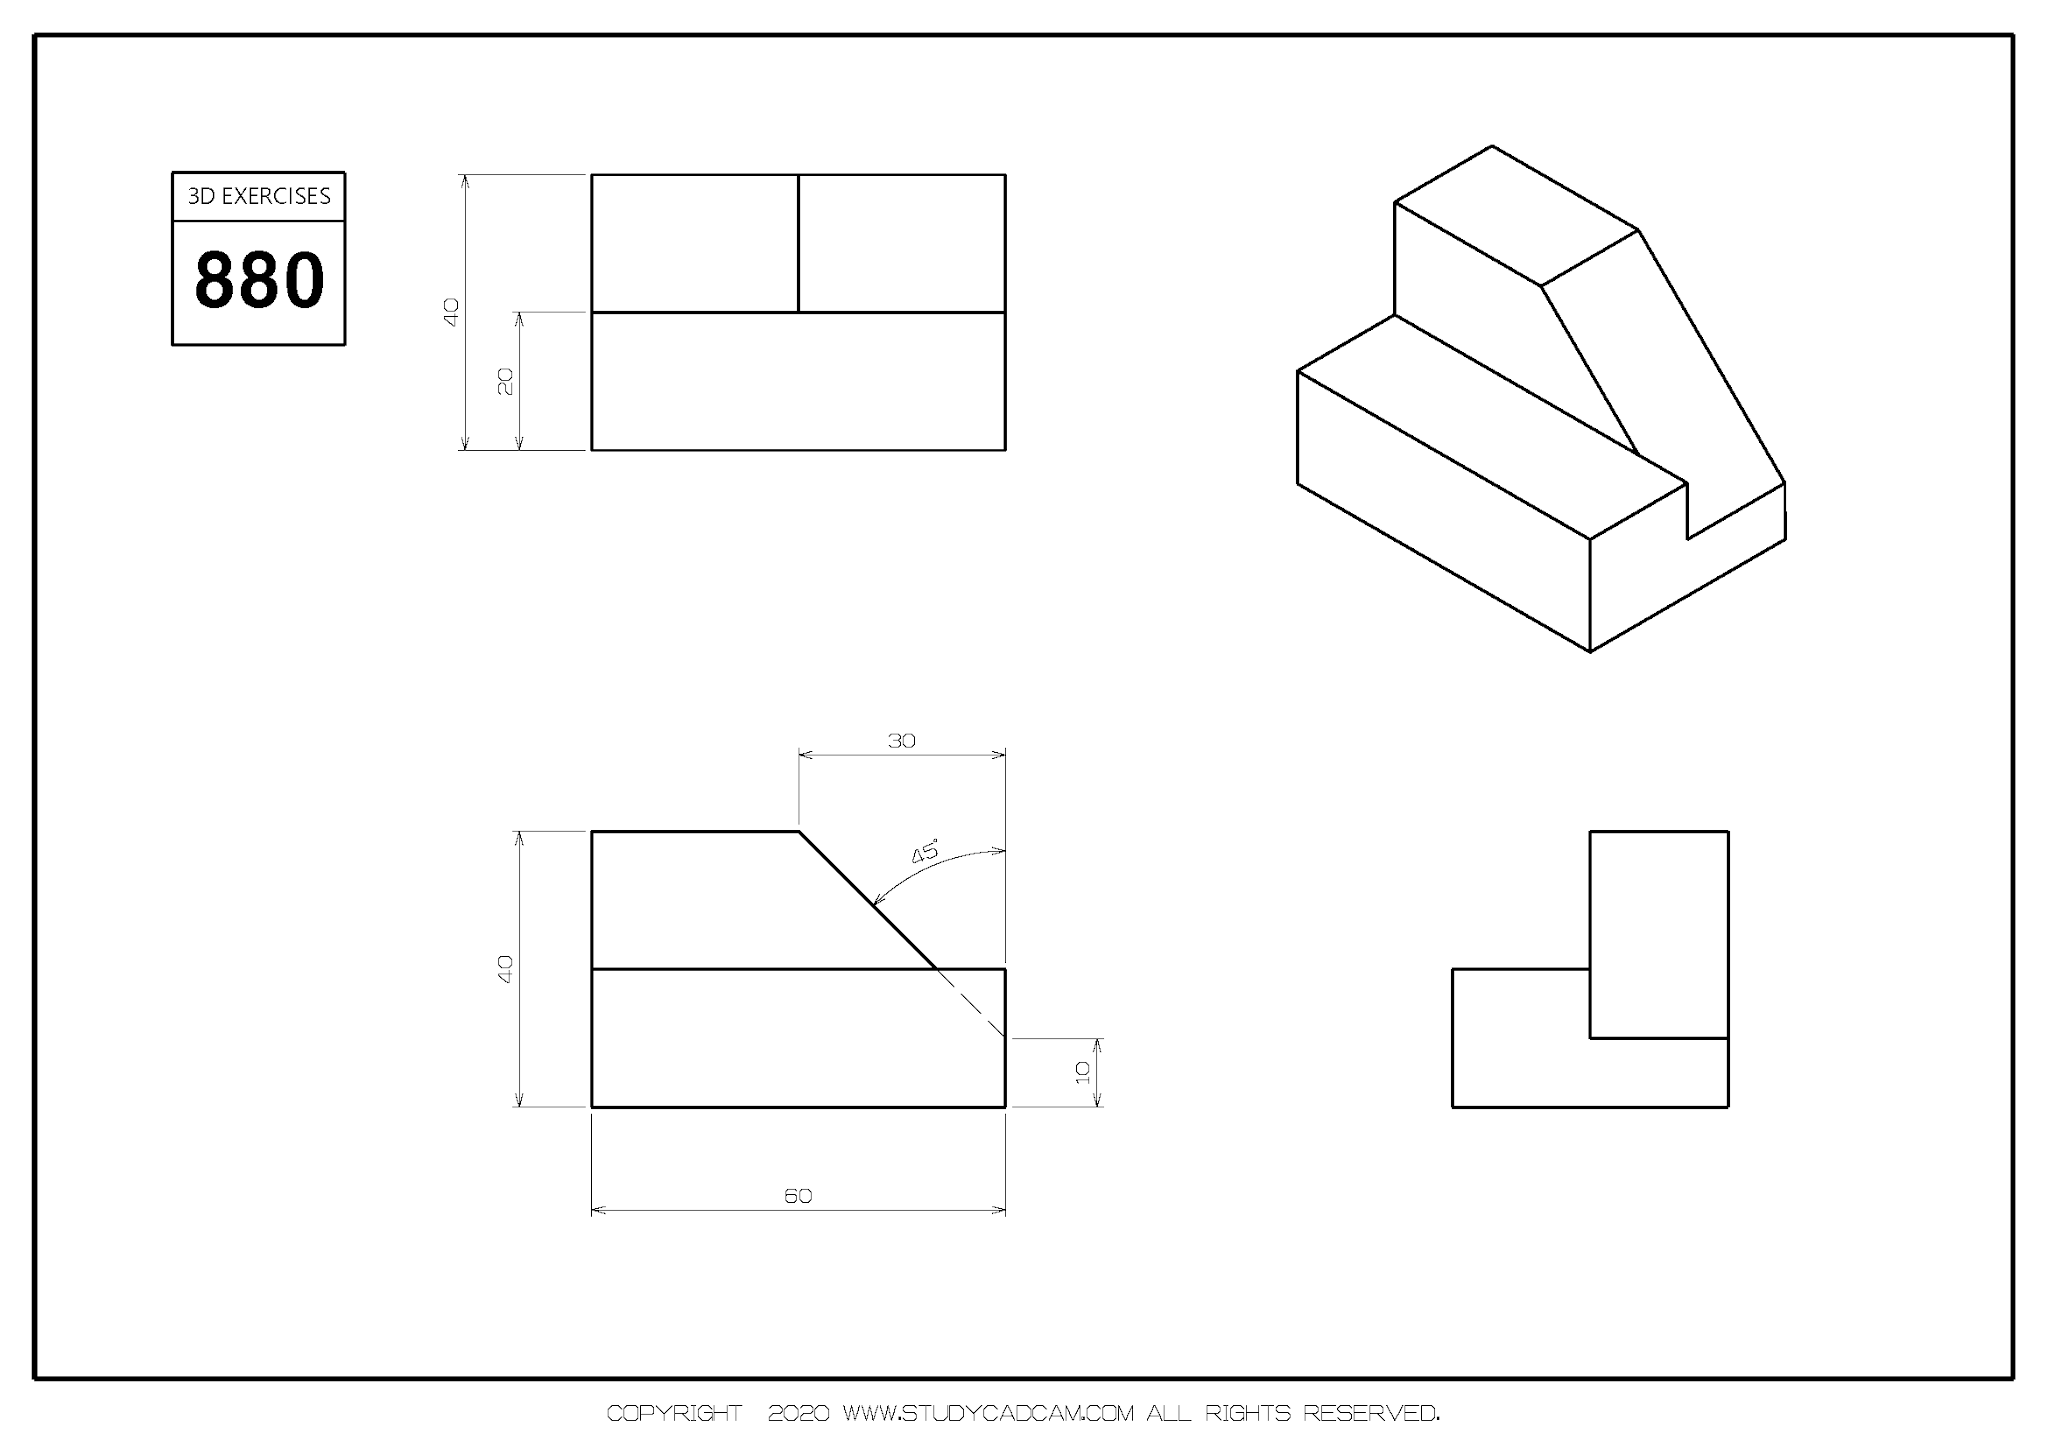 Isometric Drawing Exercises with Answers